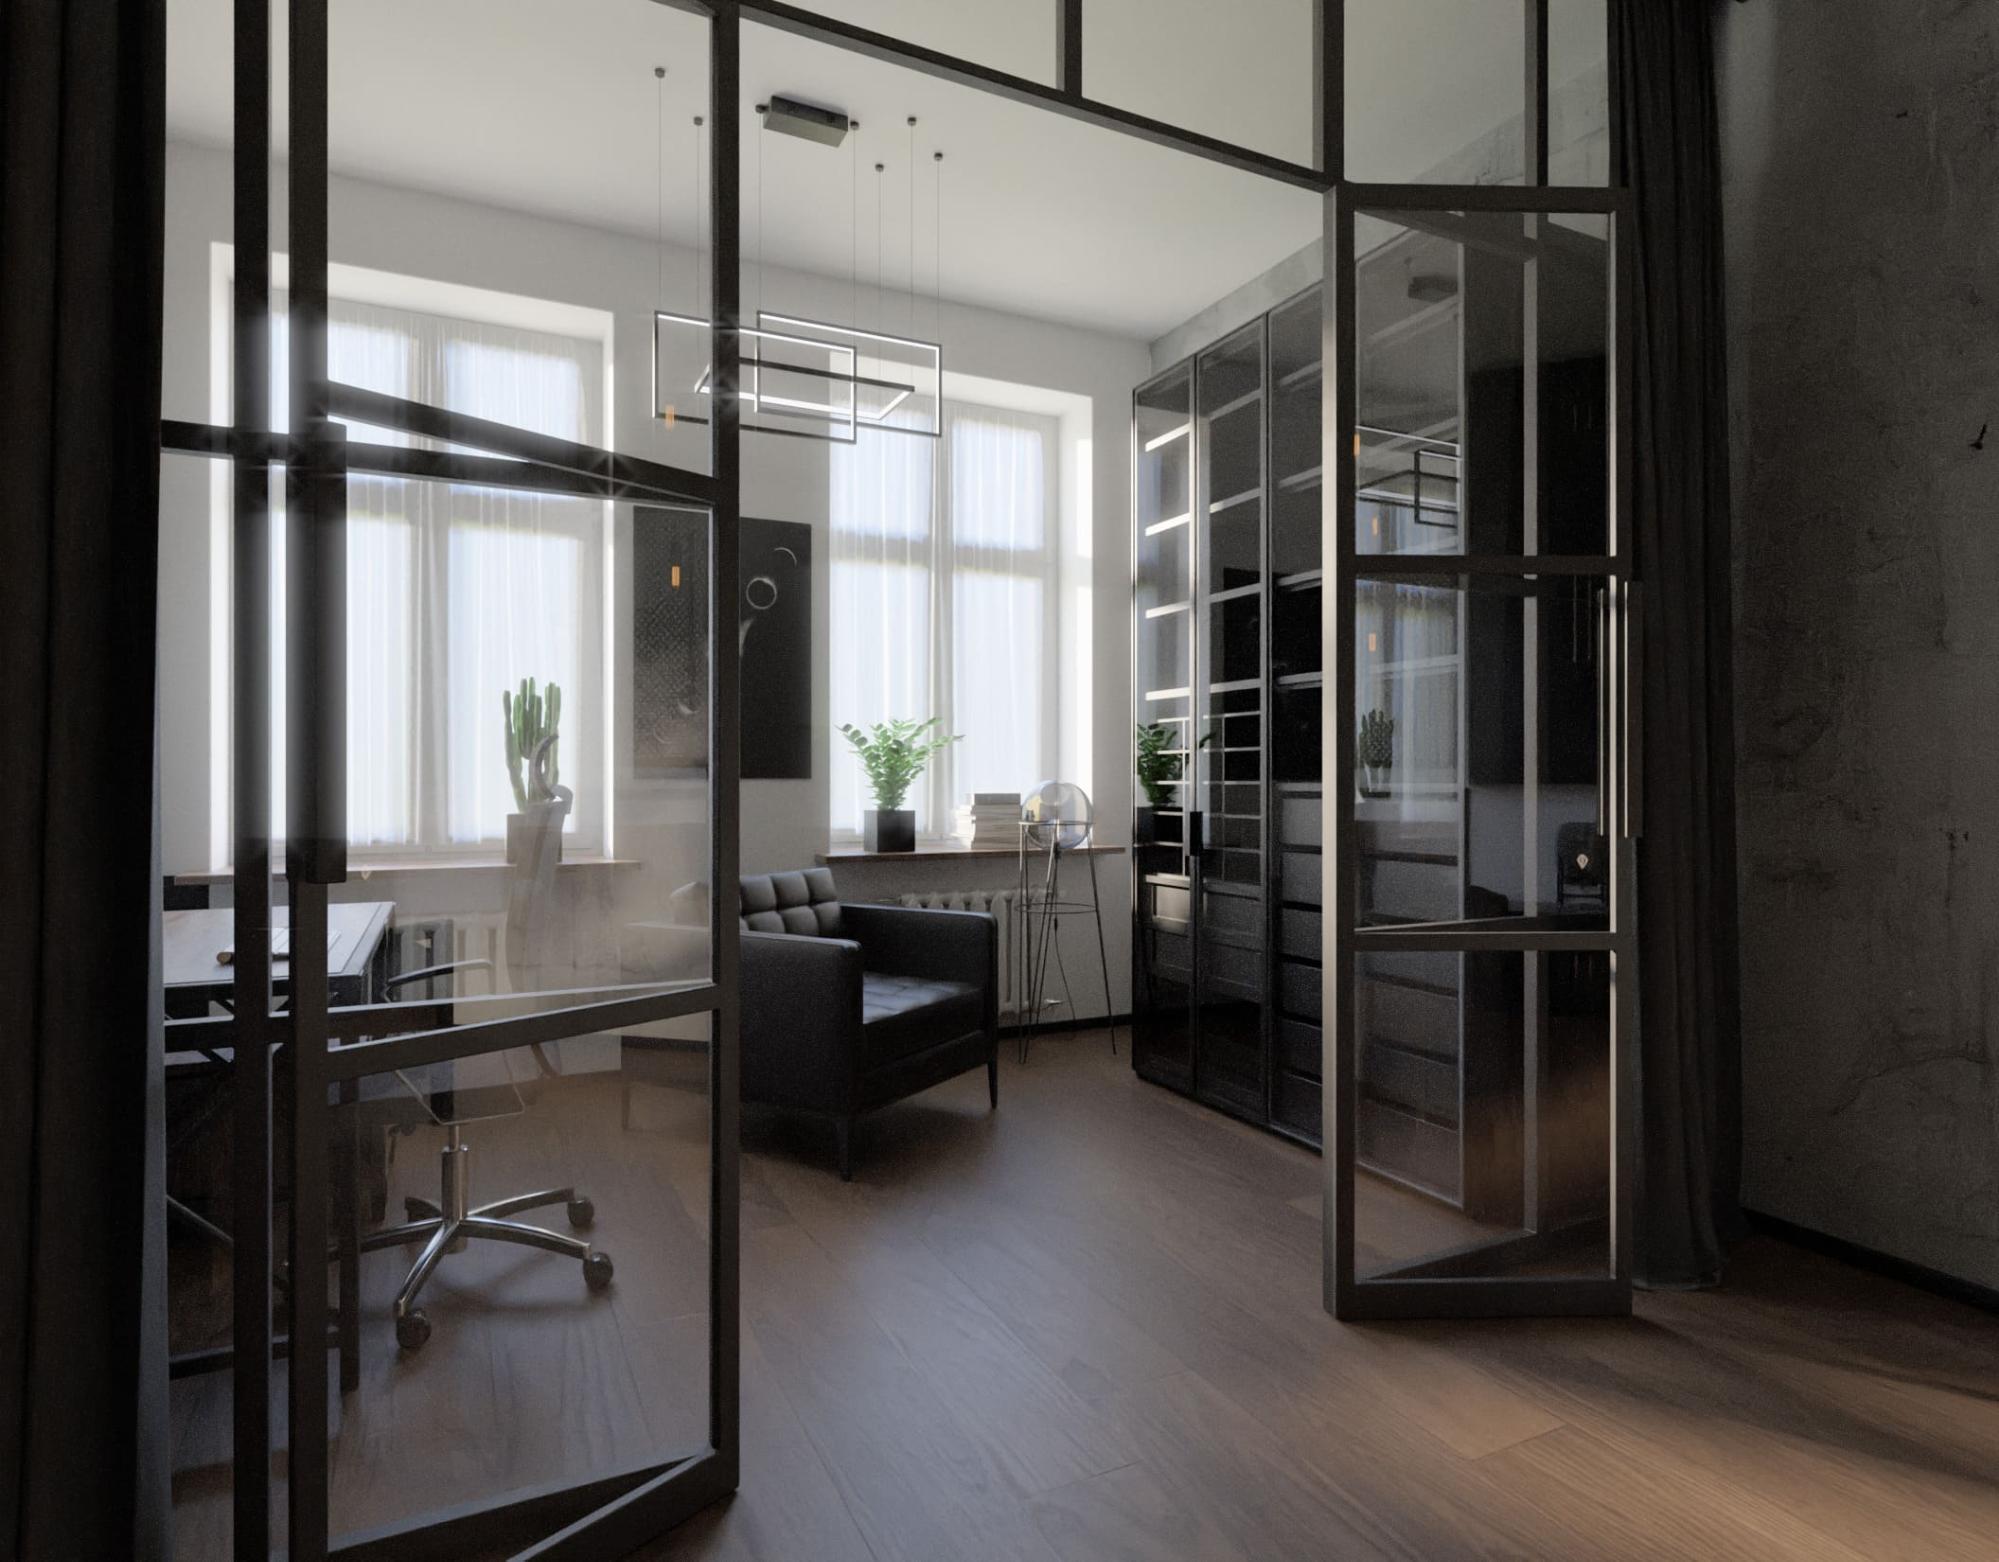 8 Best Free Interior Design Software and Tools in 2023  Foyr